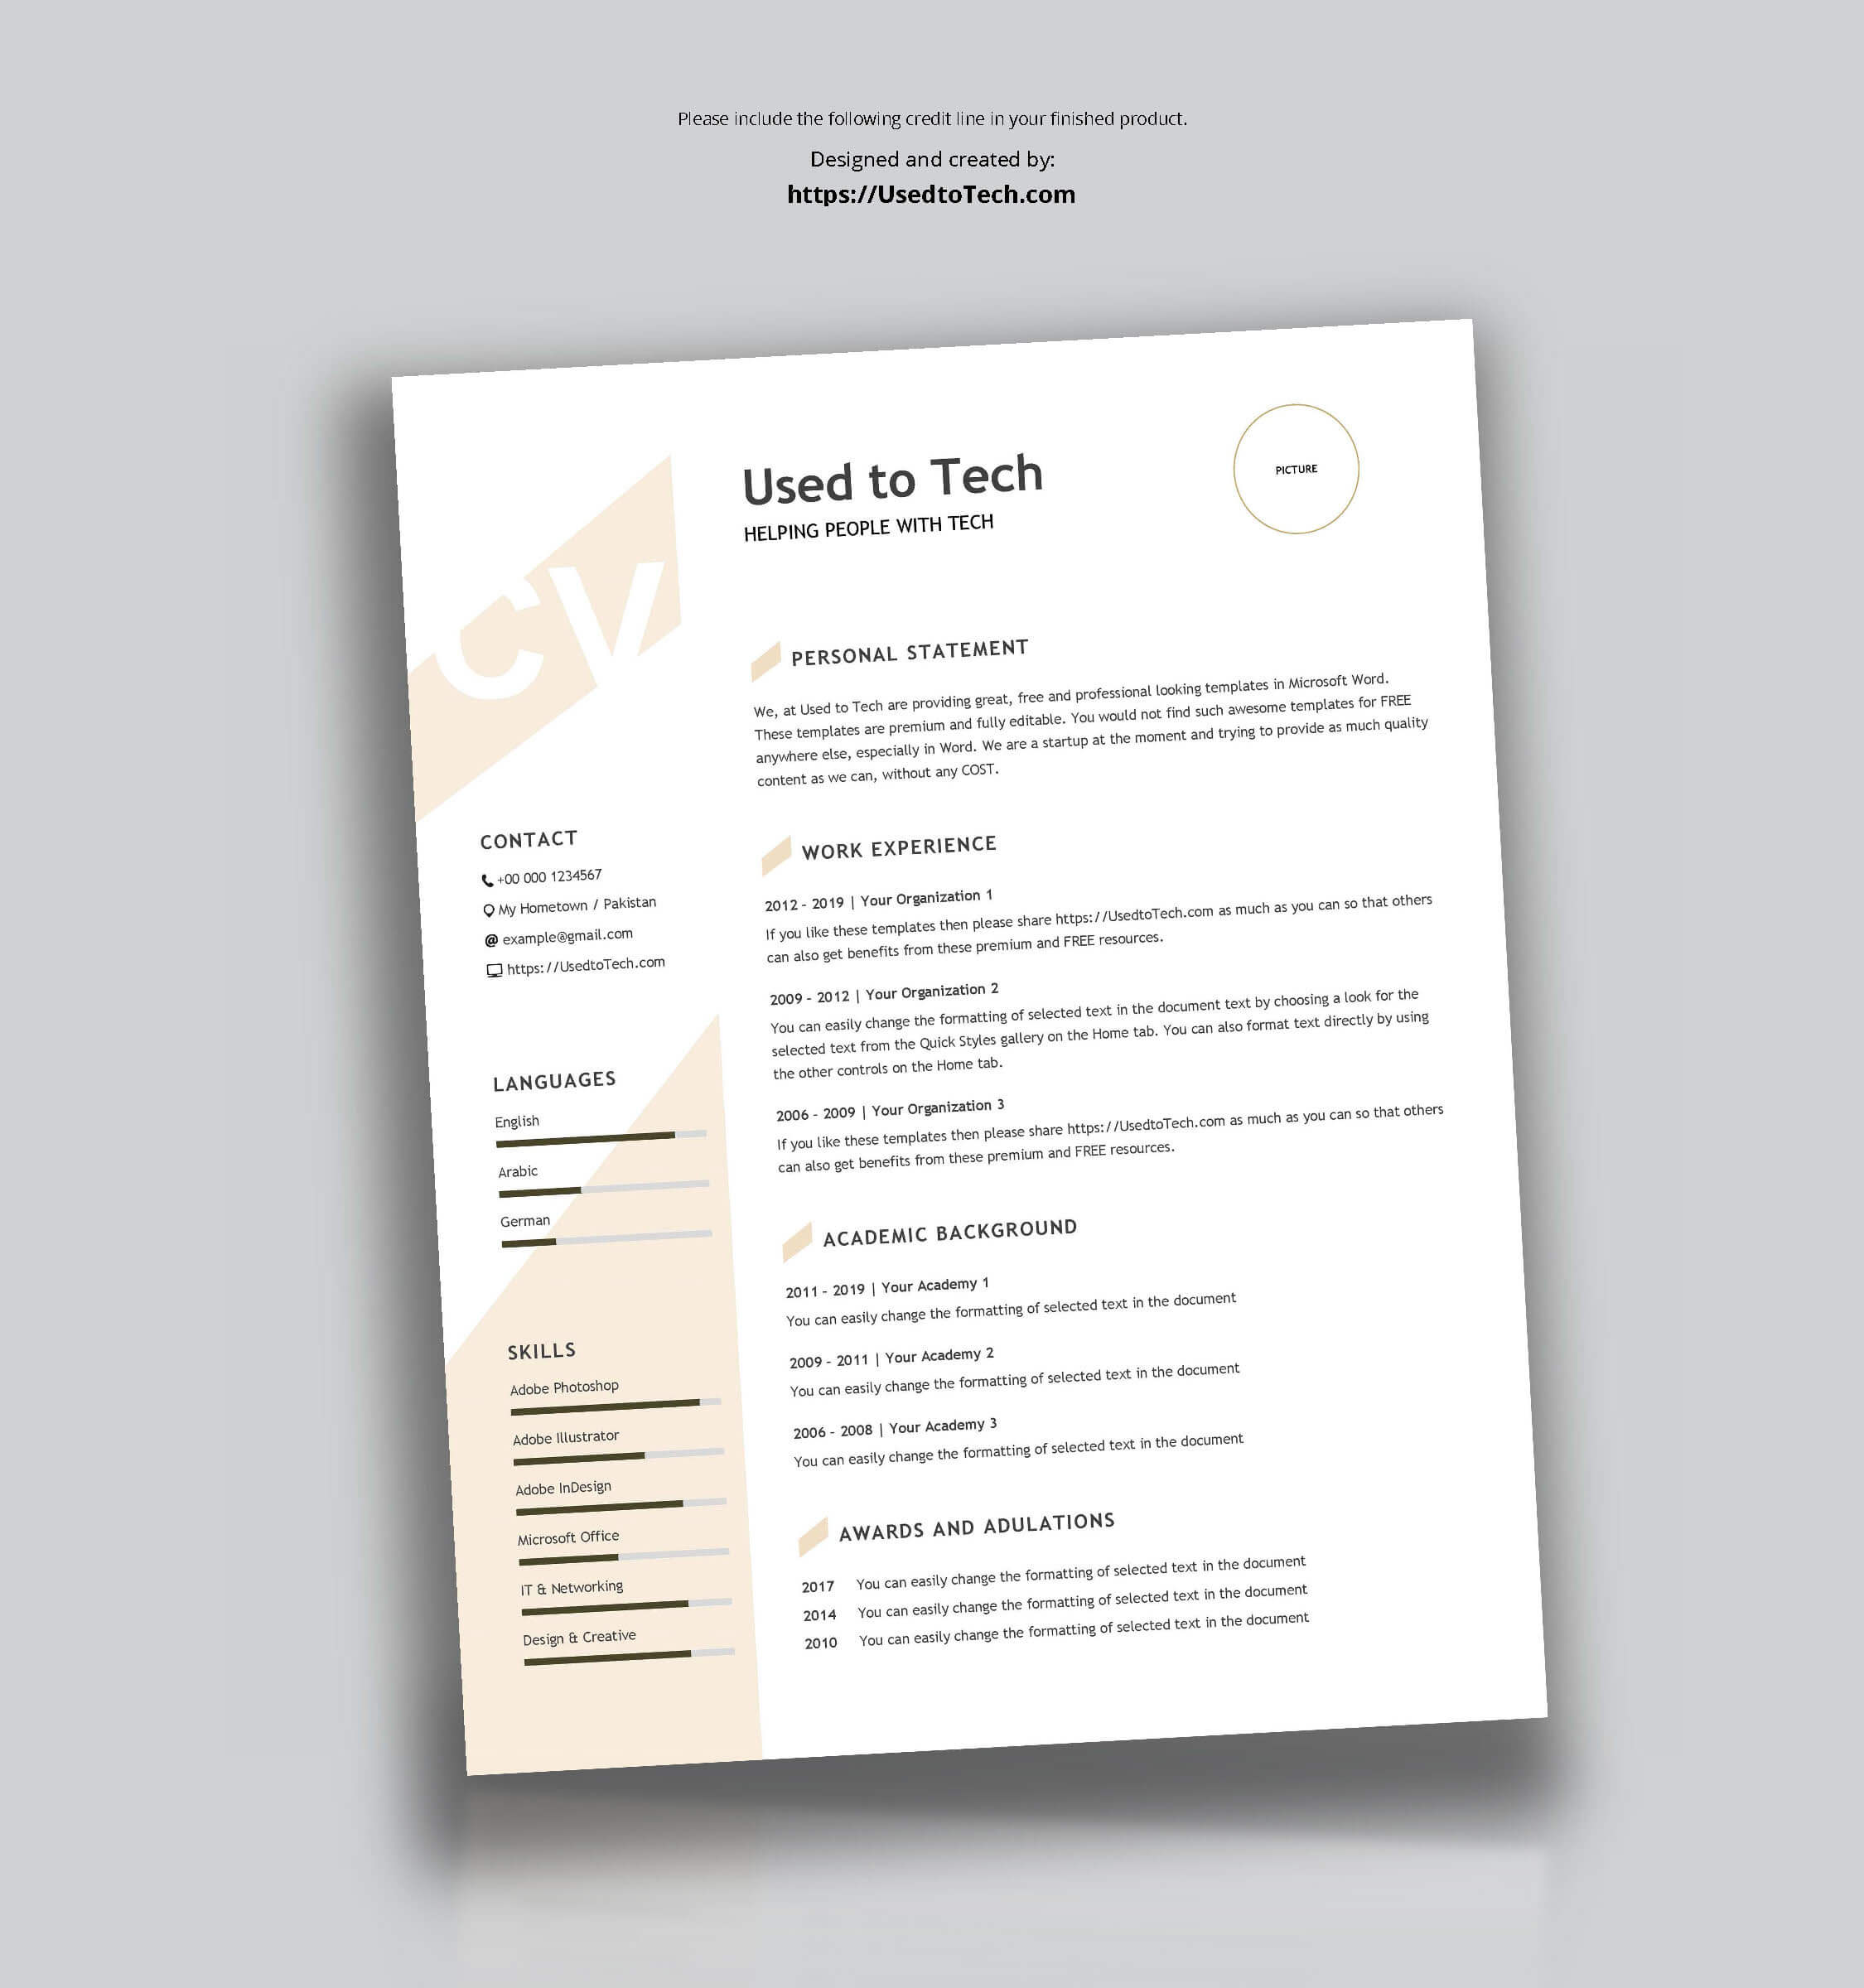 Modern Resume Template In Word Free – Used To Tech Intended For How To Find A Resume Template On Word